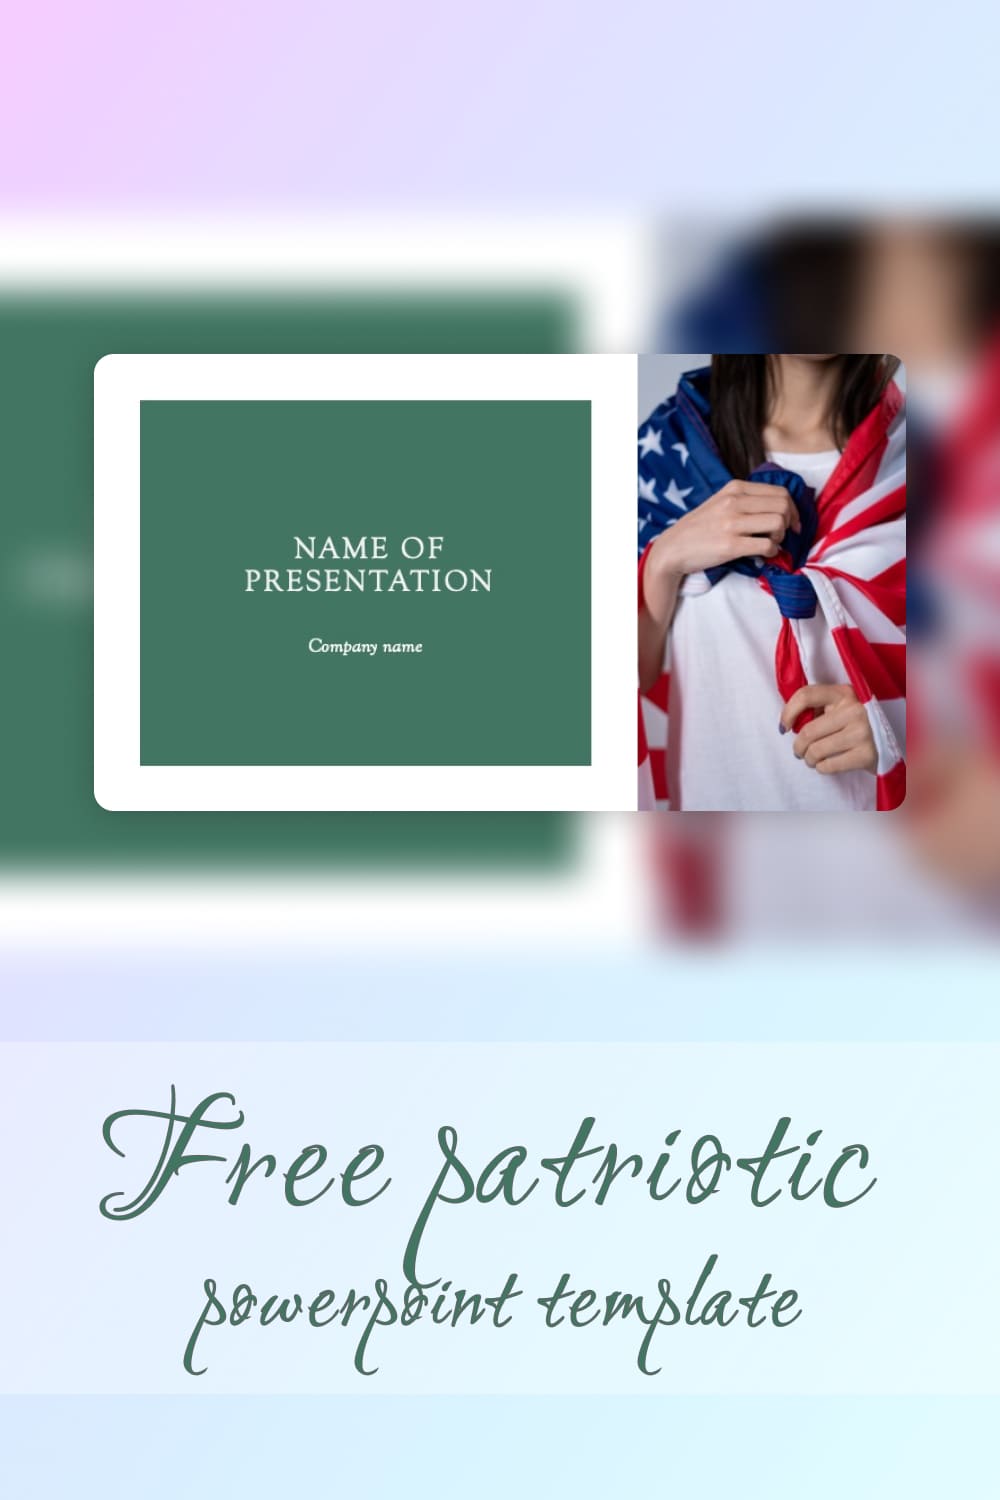 Free Patriotic Backgrounds For Powerpoint - Pinterest.